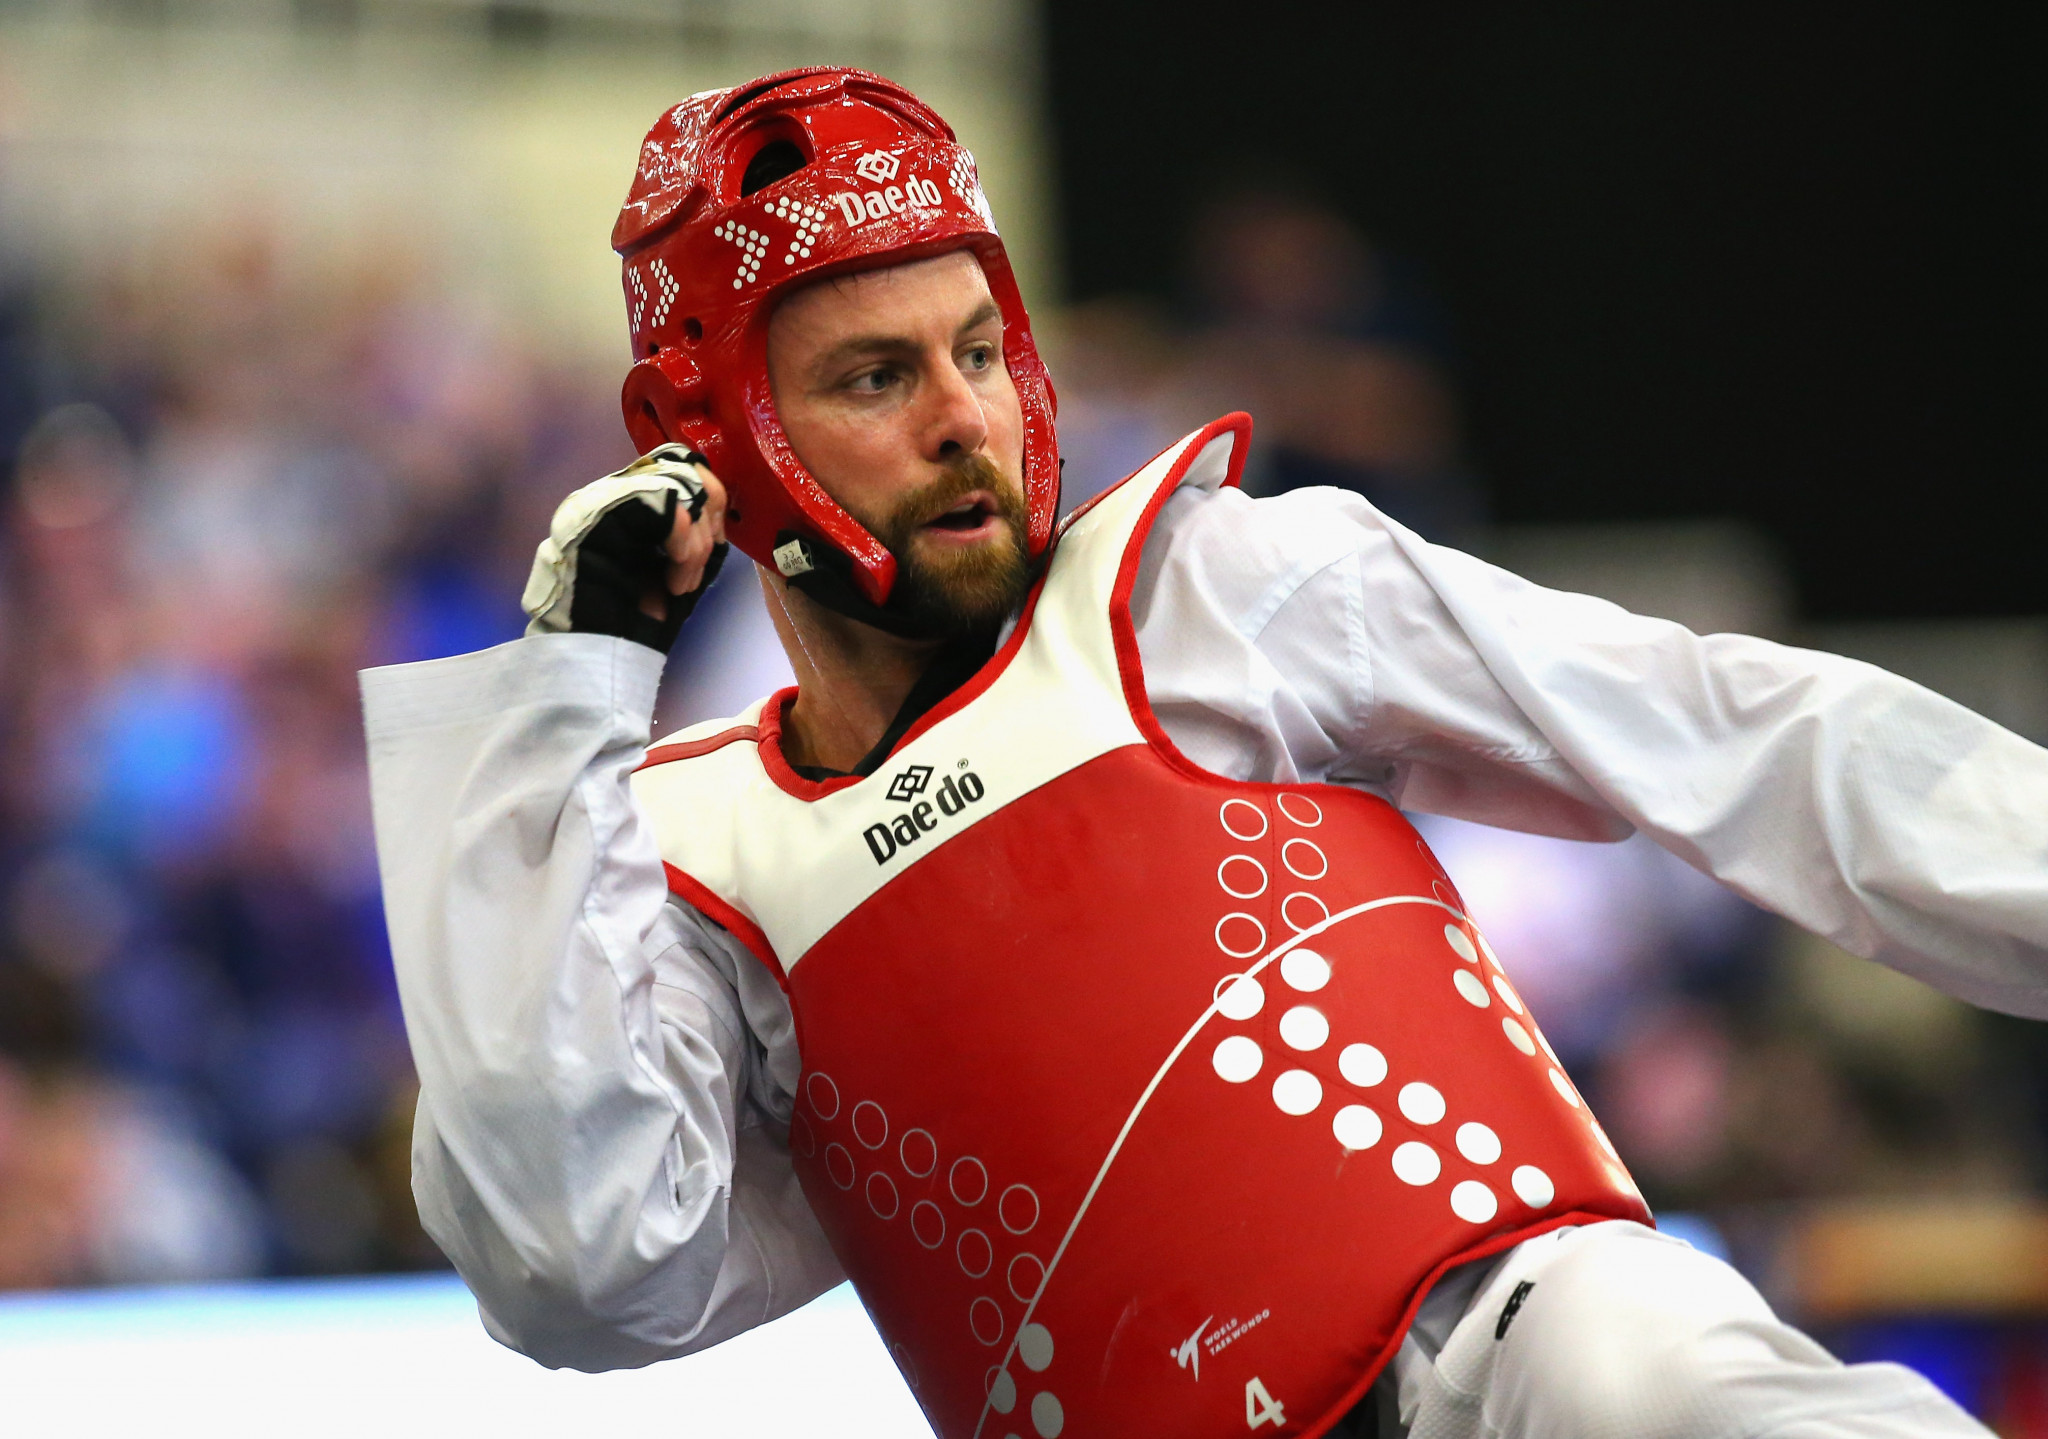 Damon Sansum finished his taekwondo career with a world silver and bronze ©Getty Images